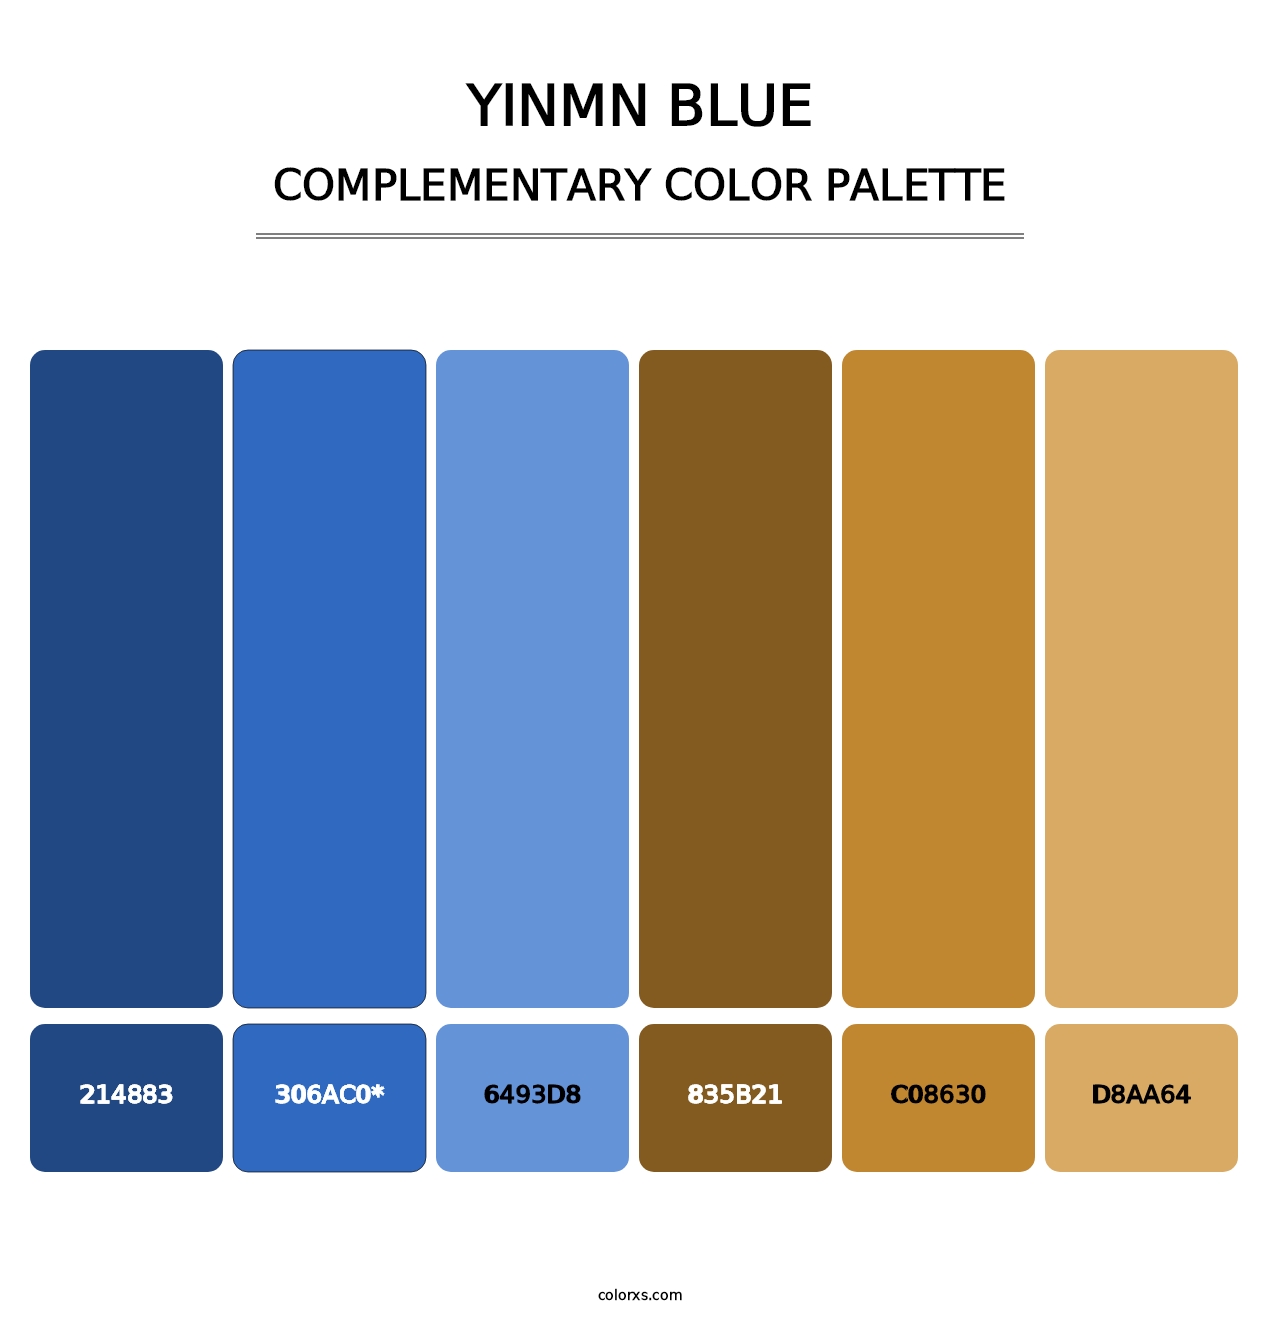 YInMn Blue - Complementary Color Palette